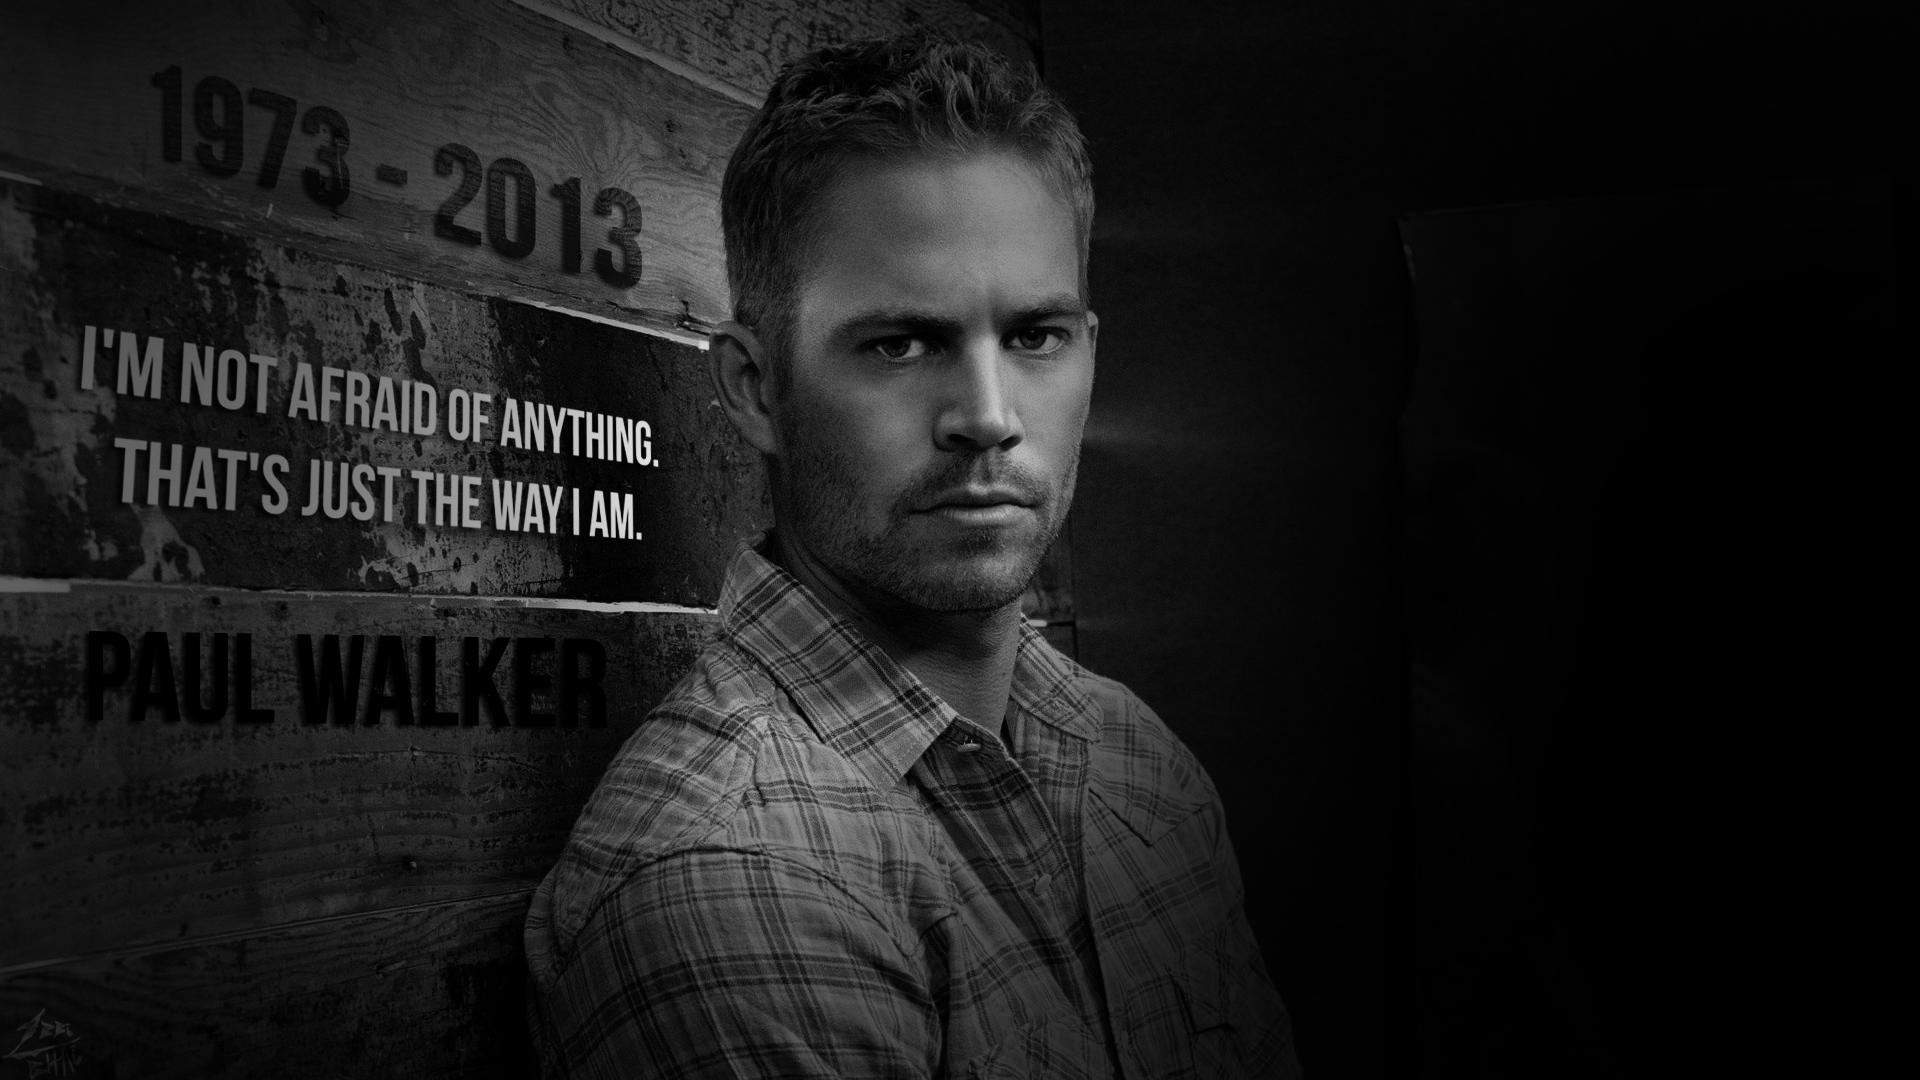 Paul Walker Wallpaper Image Photo Picture Background